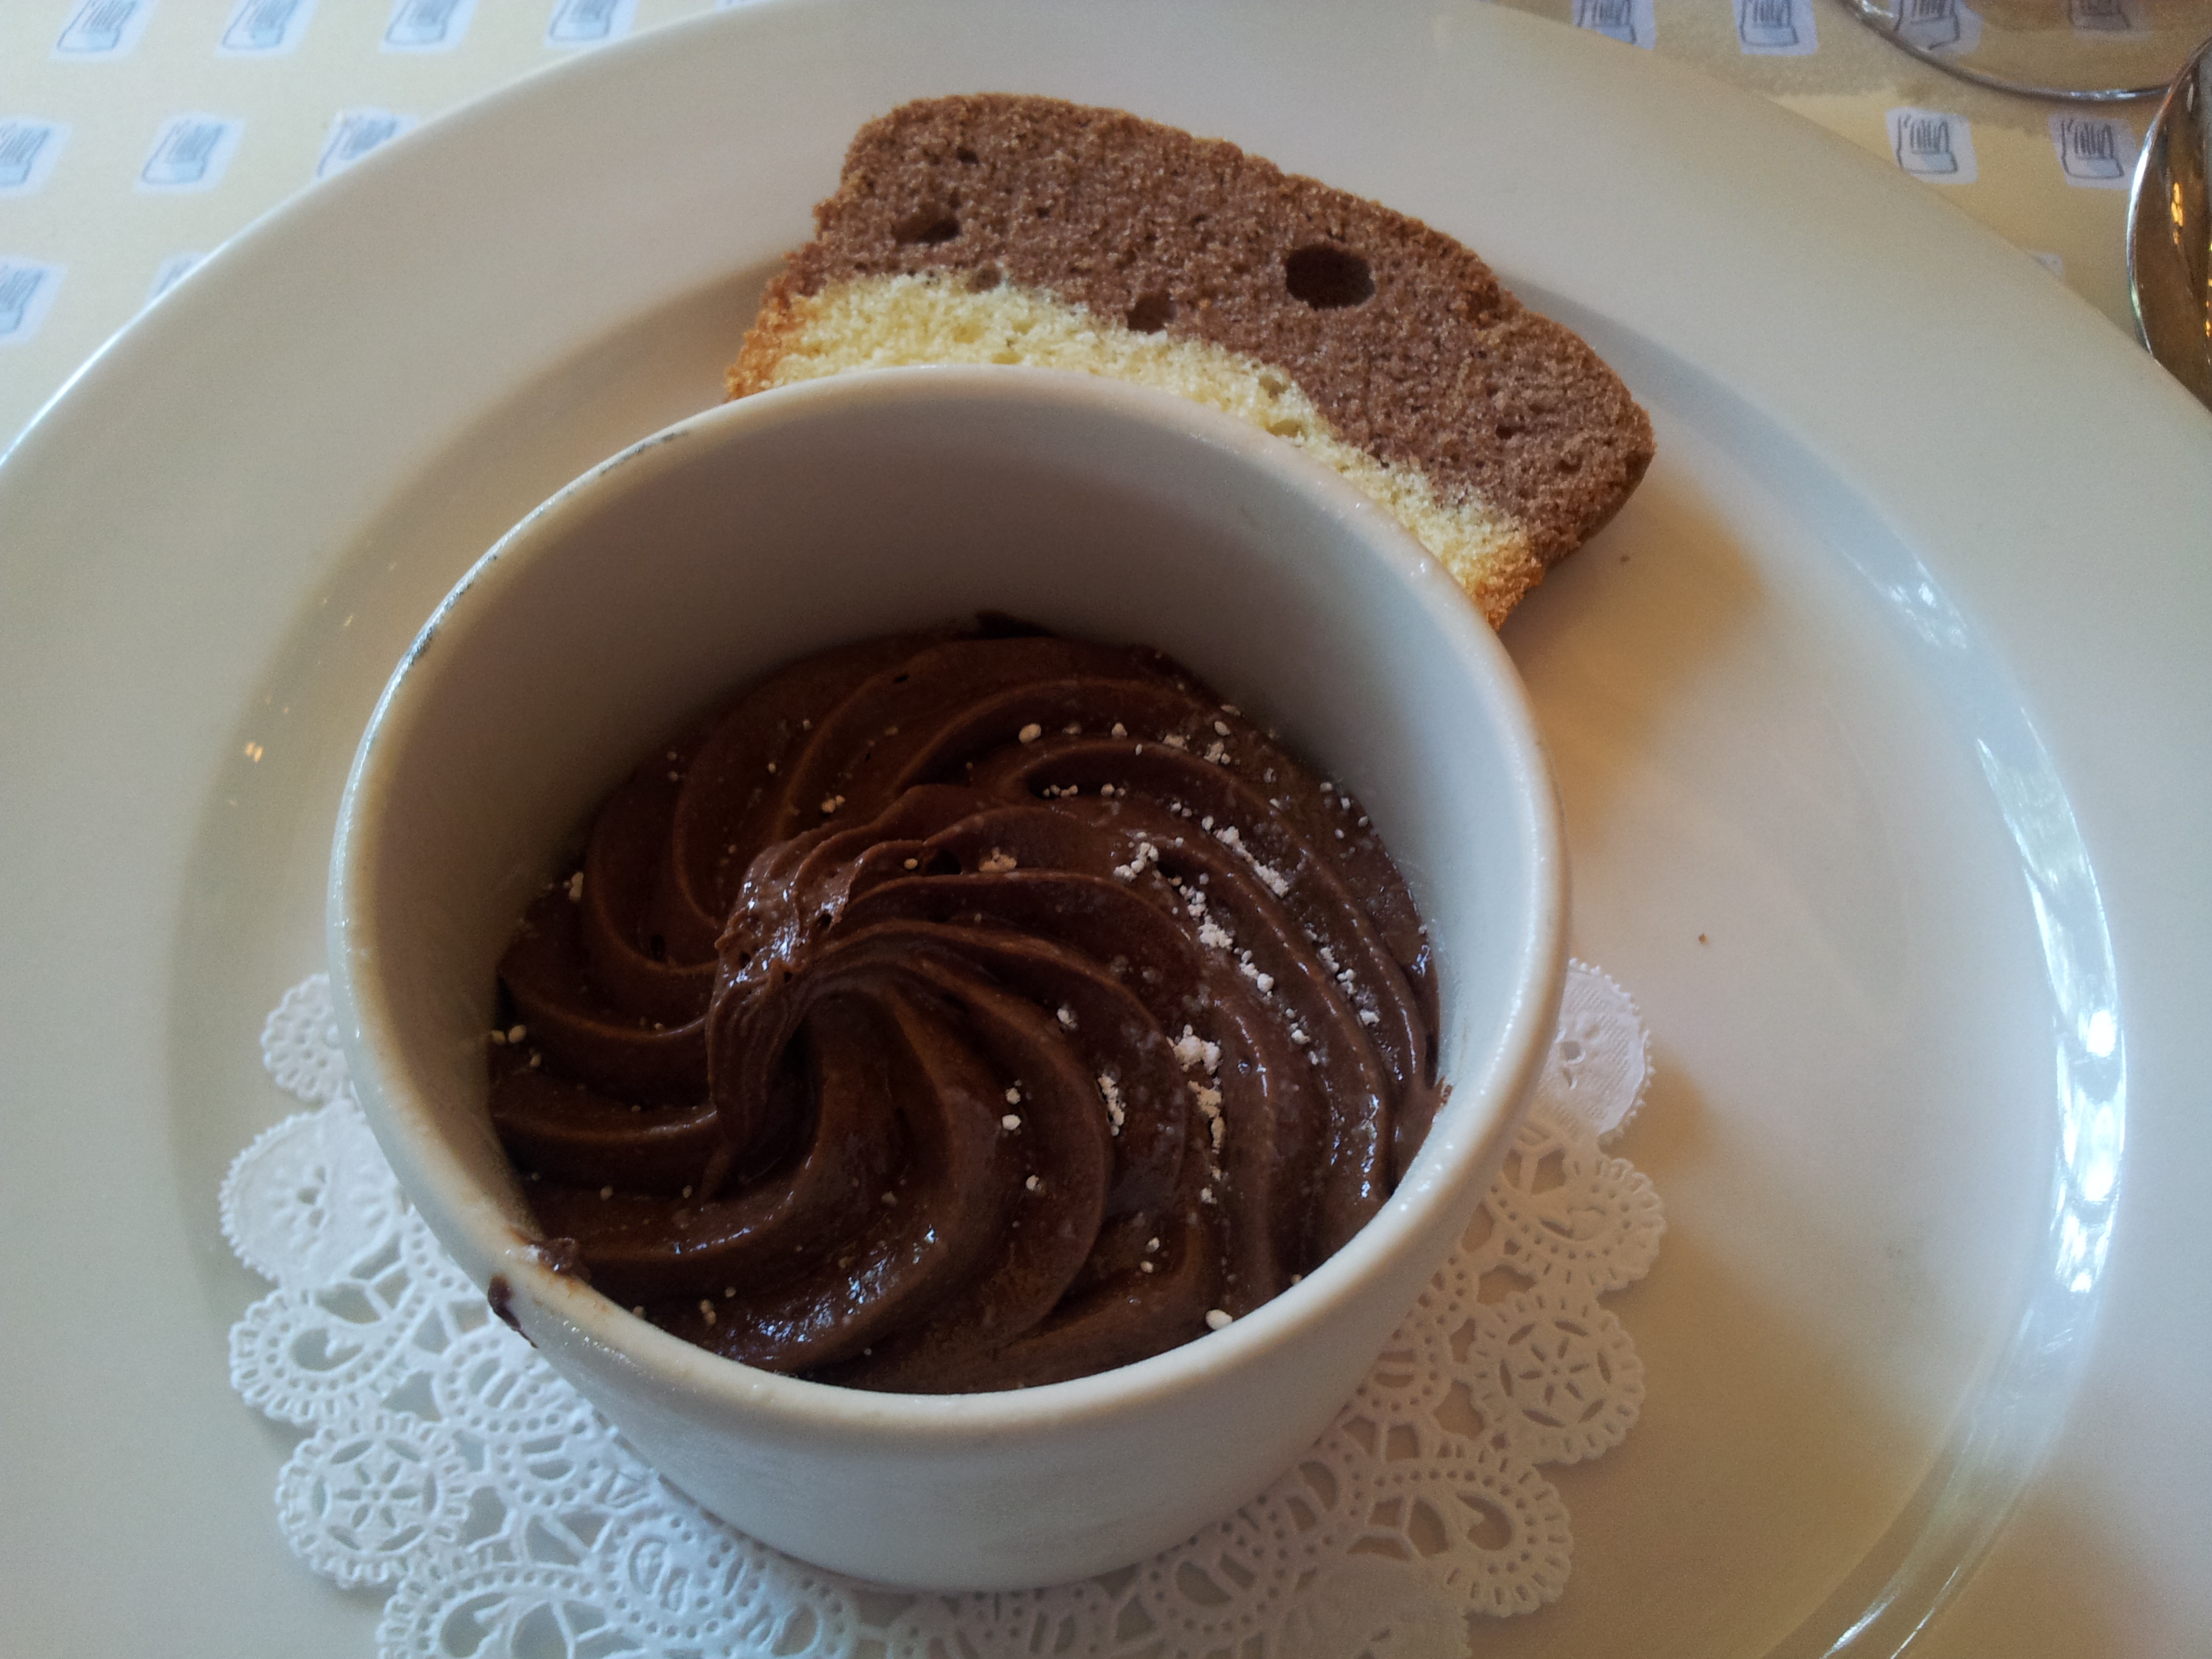 Chocolate Mousse with Caramel from Les Chefs de France in Epcot Disney World